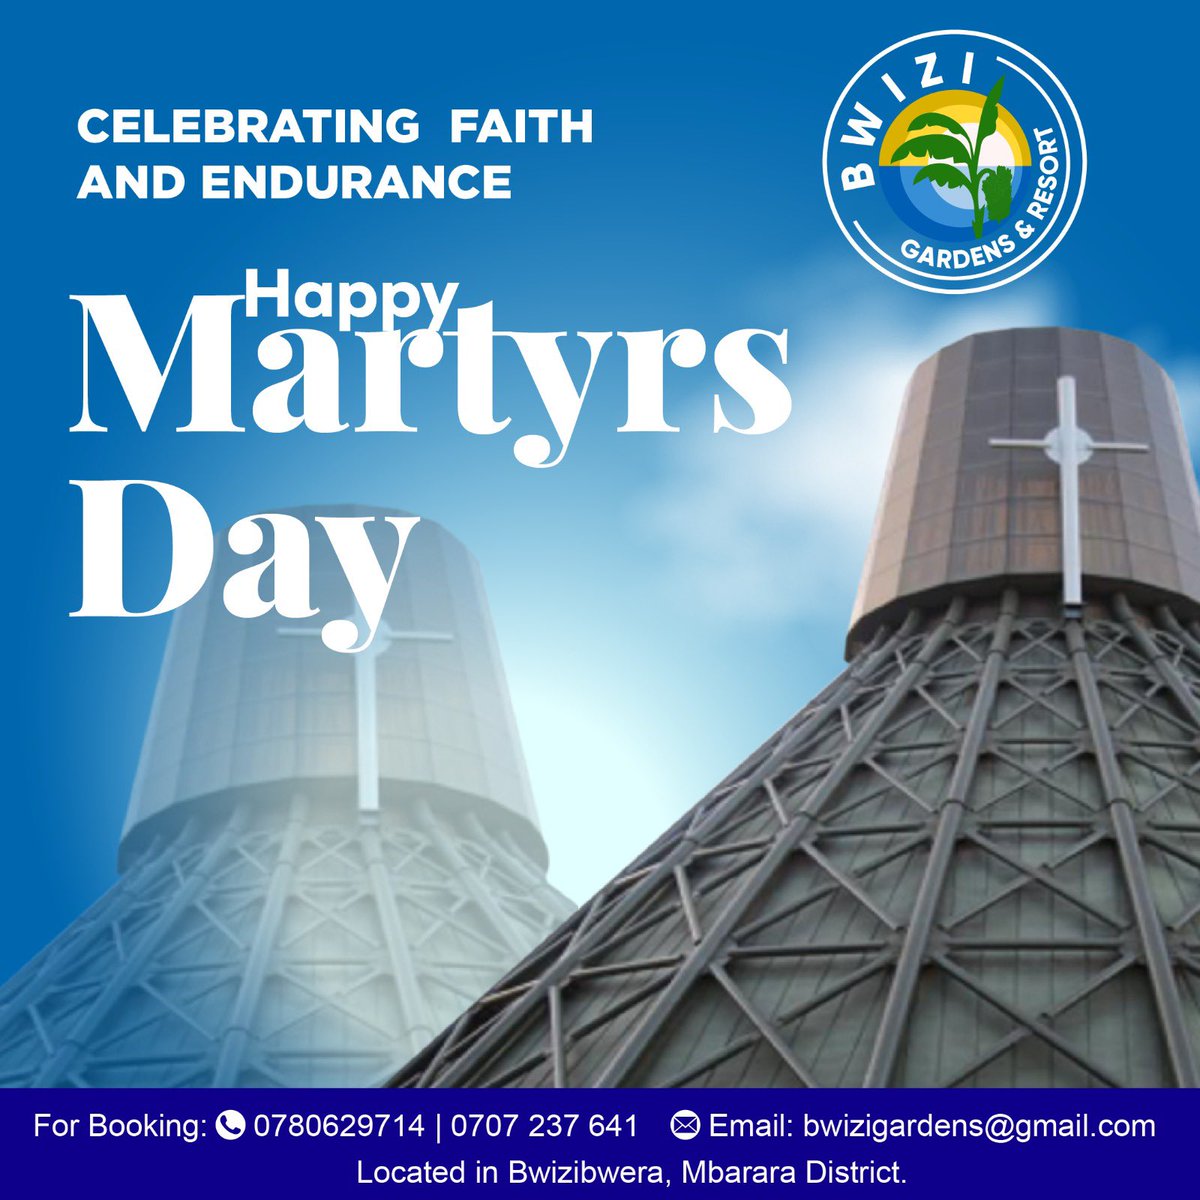 We remember and celebrate the lives of those who made the ultimate sacrifice for their faith.
May their courage always be an inspiration to all of us. 
Happy Martyrs’ Day! 
#MartyrsDay2023
#BwiziGardensAndResort